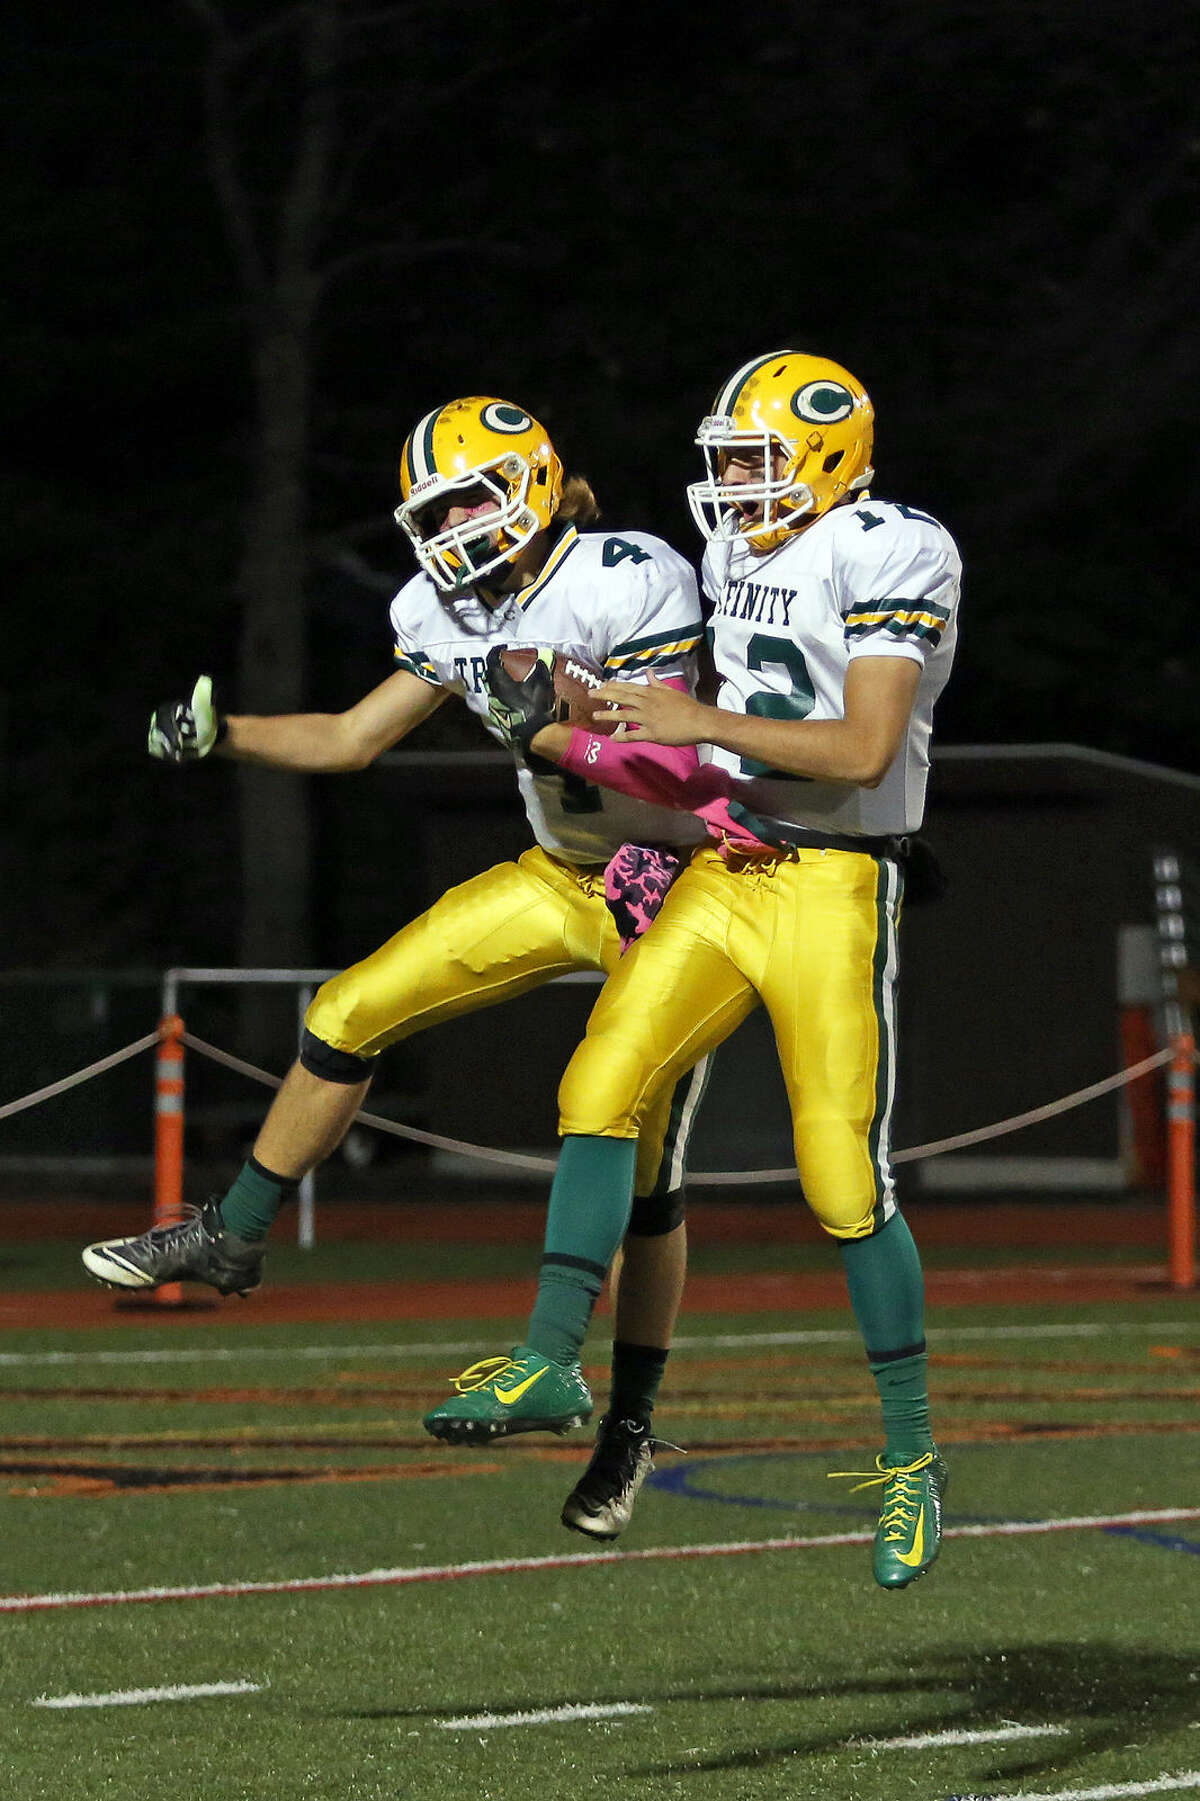 Trinity Catholic's #4, Johnny Somers, is congratulated by #12, Anthony Lombardi, after scoring a touchdown during a game against Stamford High School at Boyle Stadium Friday evening. Hour Photo / Danielle Calloway